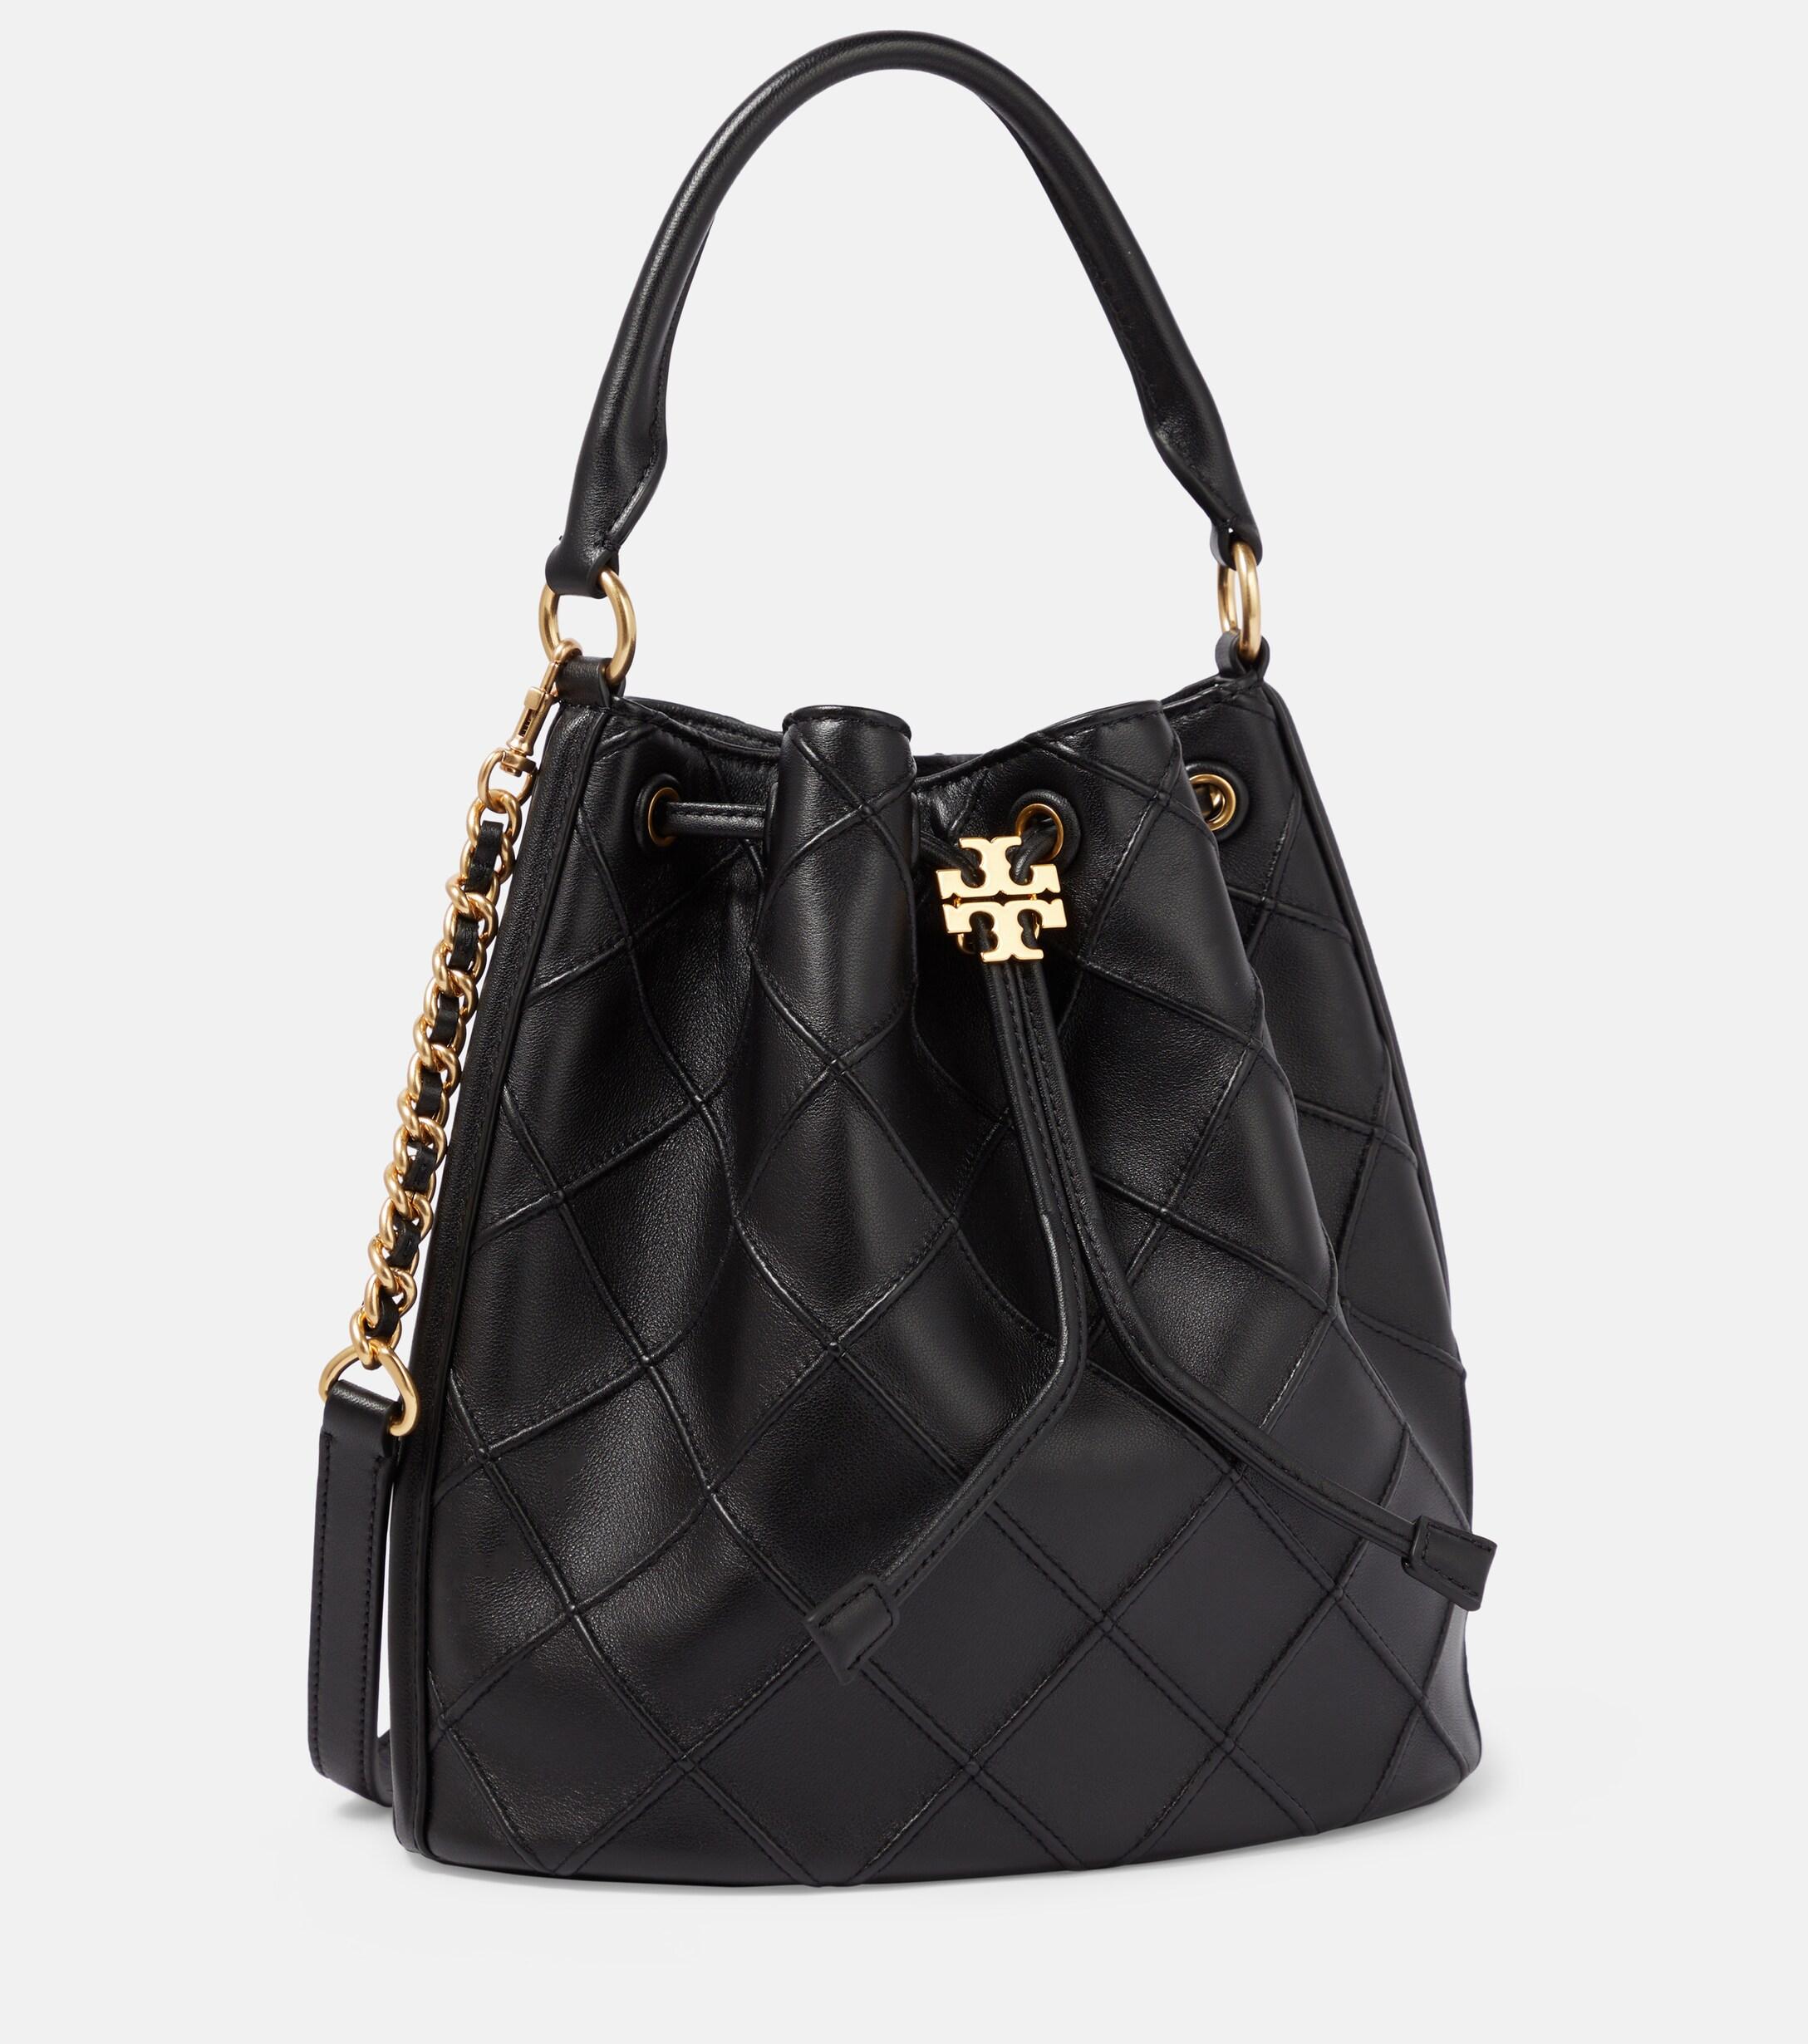 Tory Burch Fleming Bucket Bag + Why I Left  for 2 Years